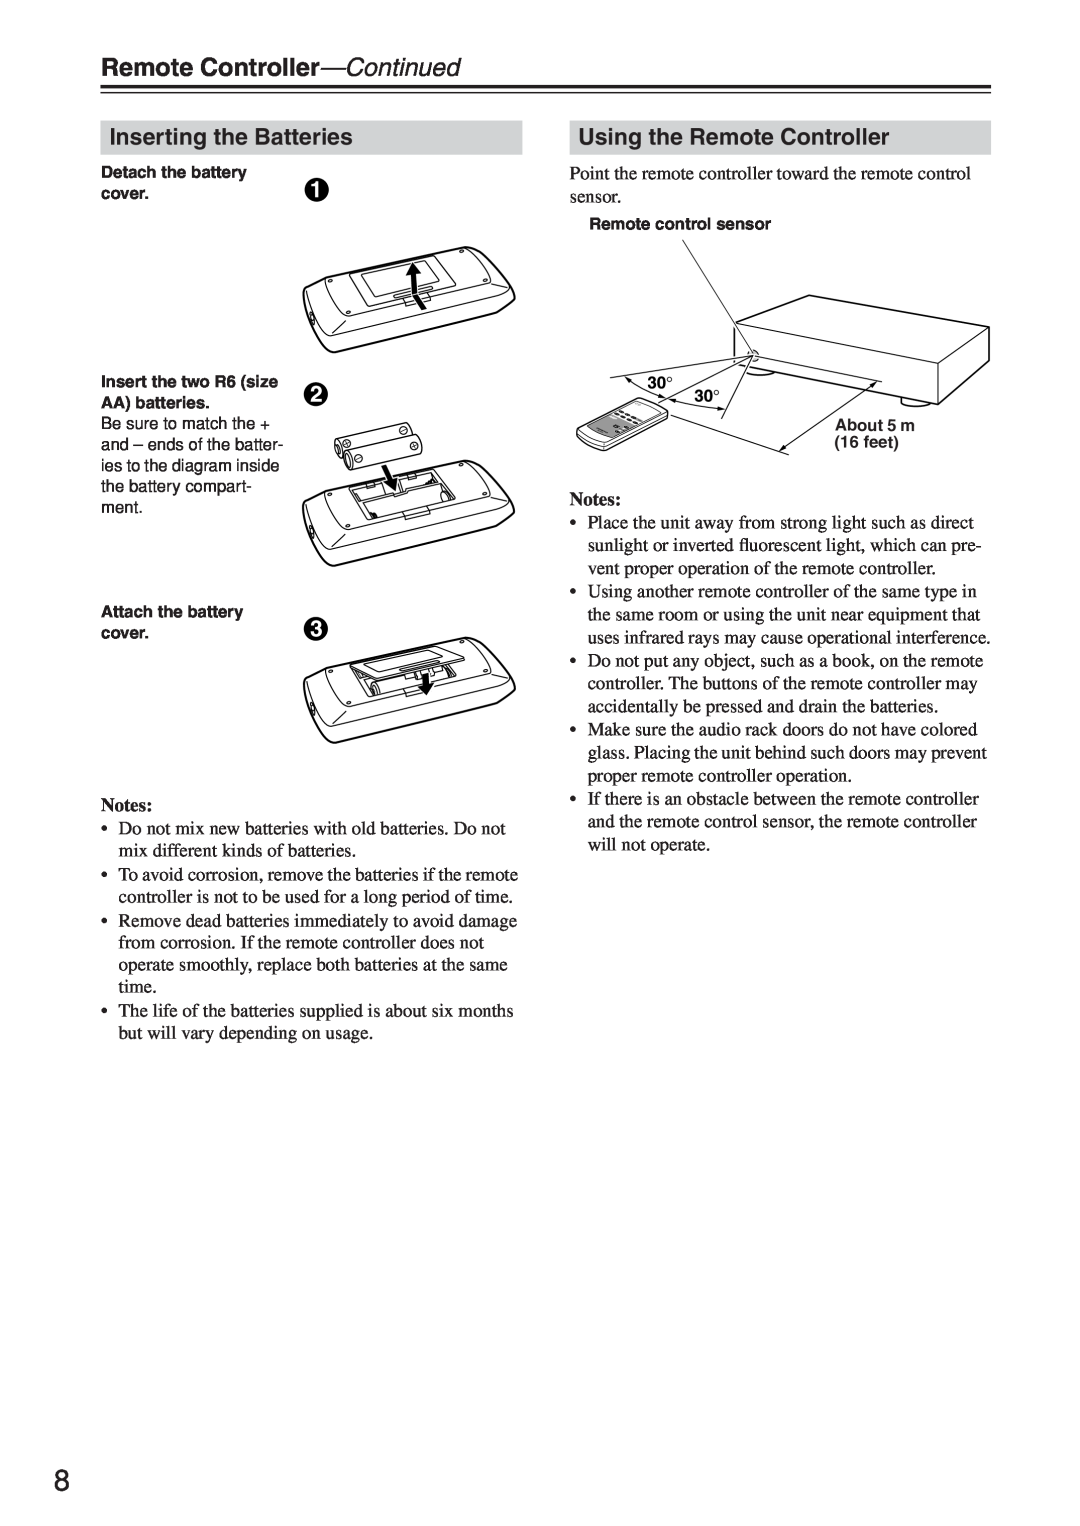 Onkyo A-1VL instruction manual Remote Controller-Continued, Inserting the Batteries, Using the Remote Controller 